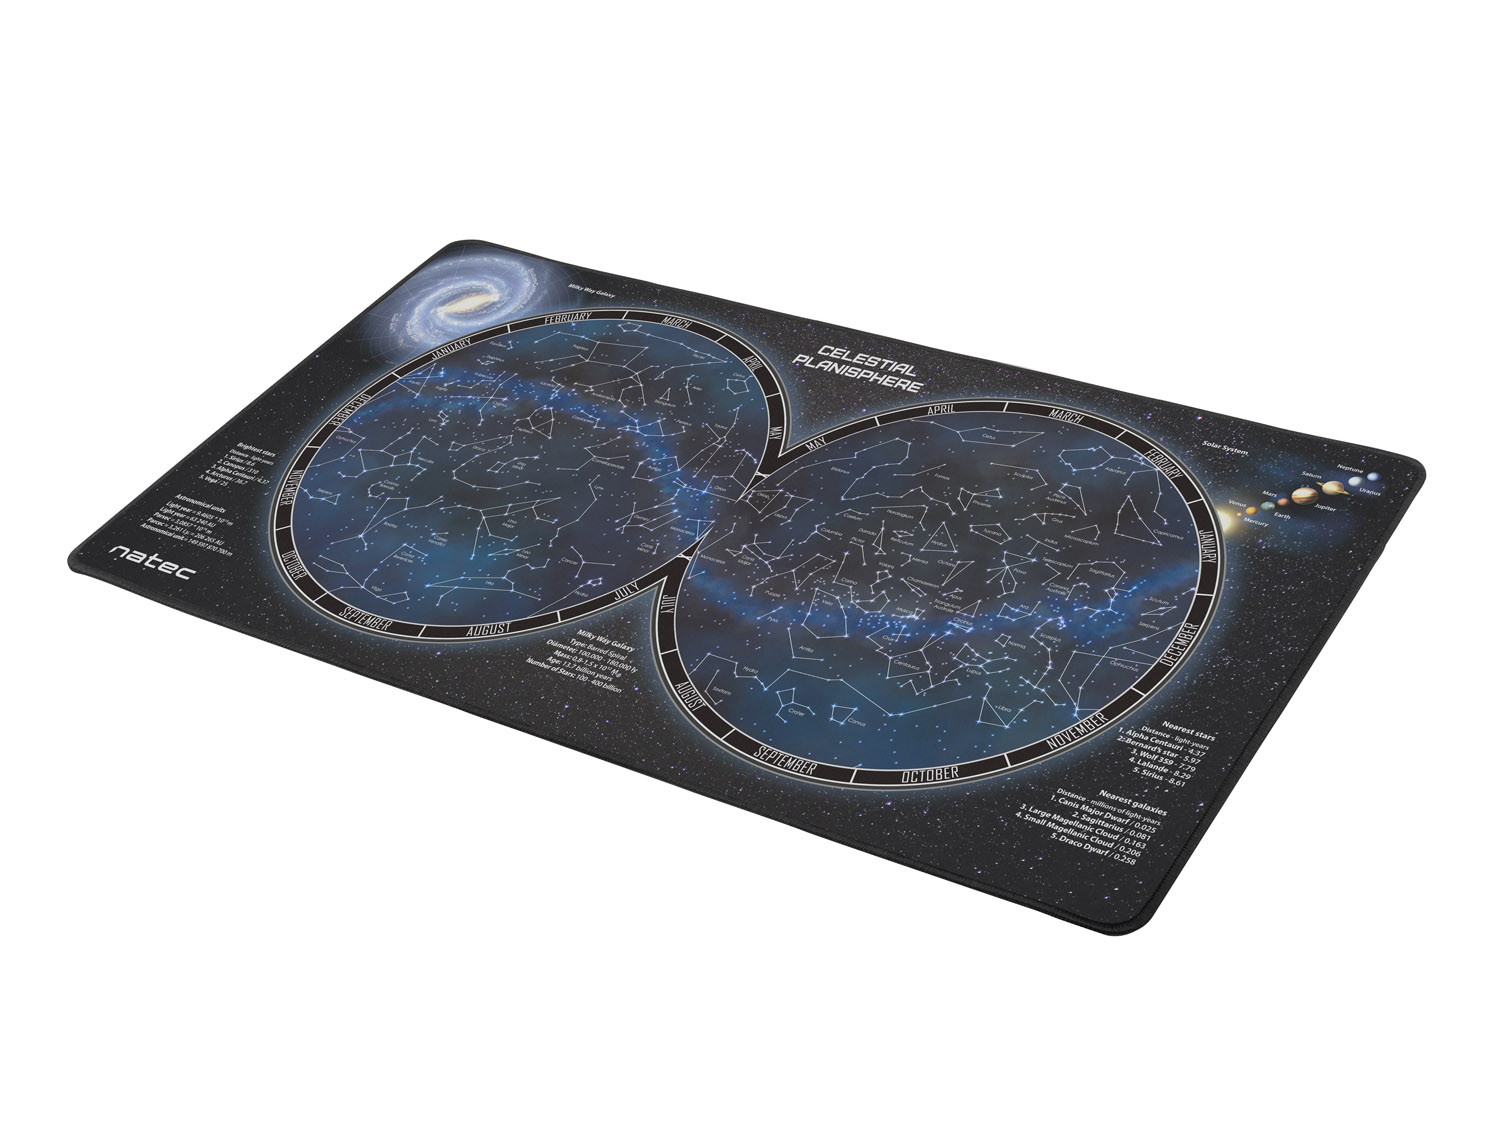 Natec OFFICE MOUSE PAD - Univers Map 800 x 400 NPO-1299